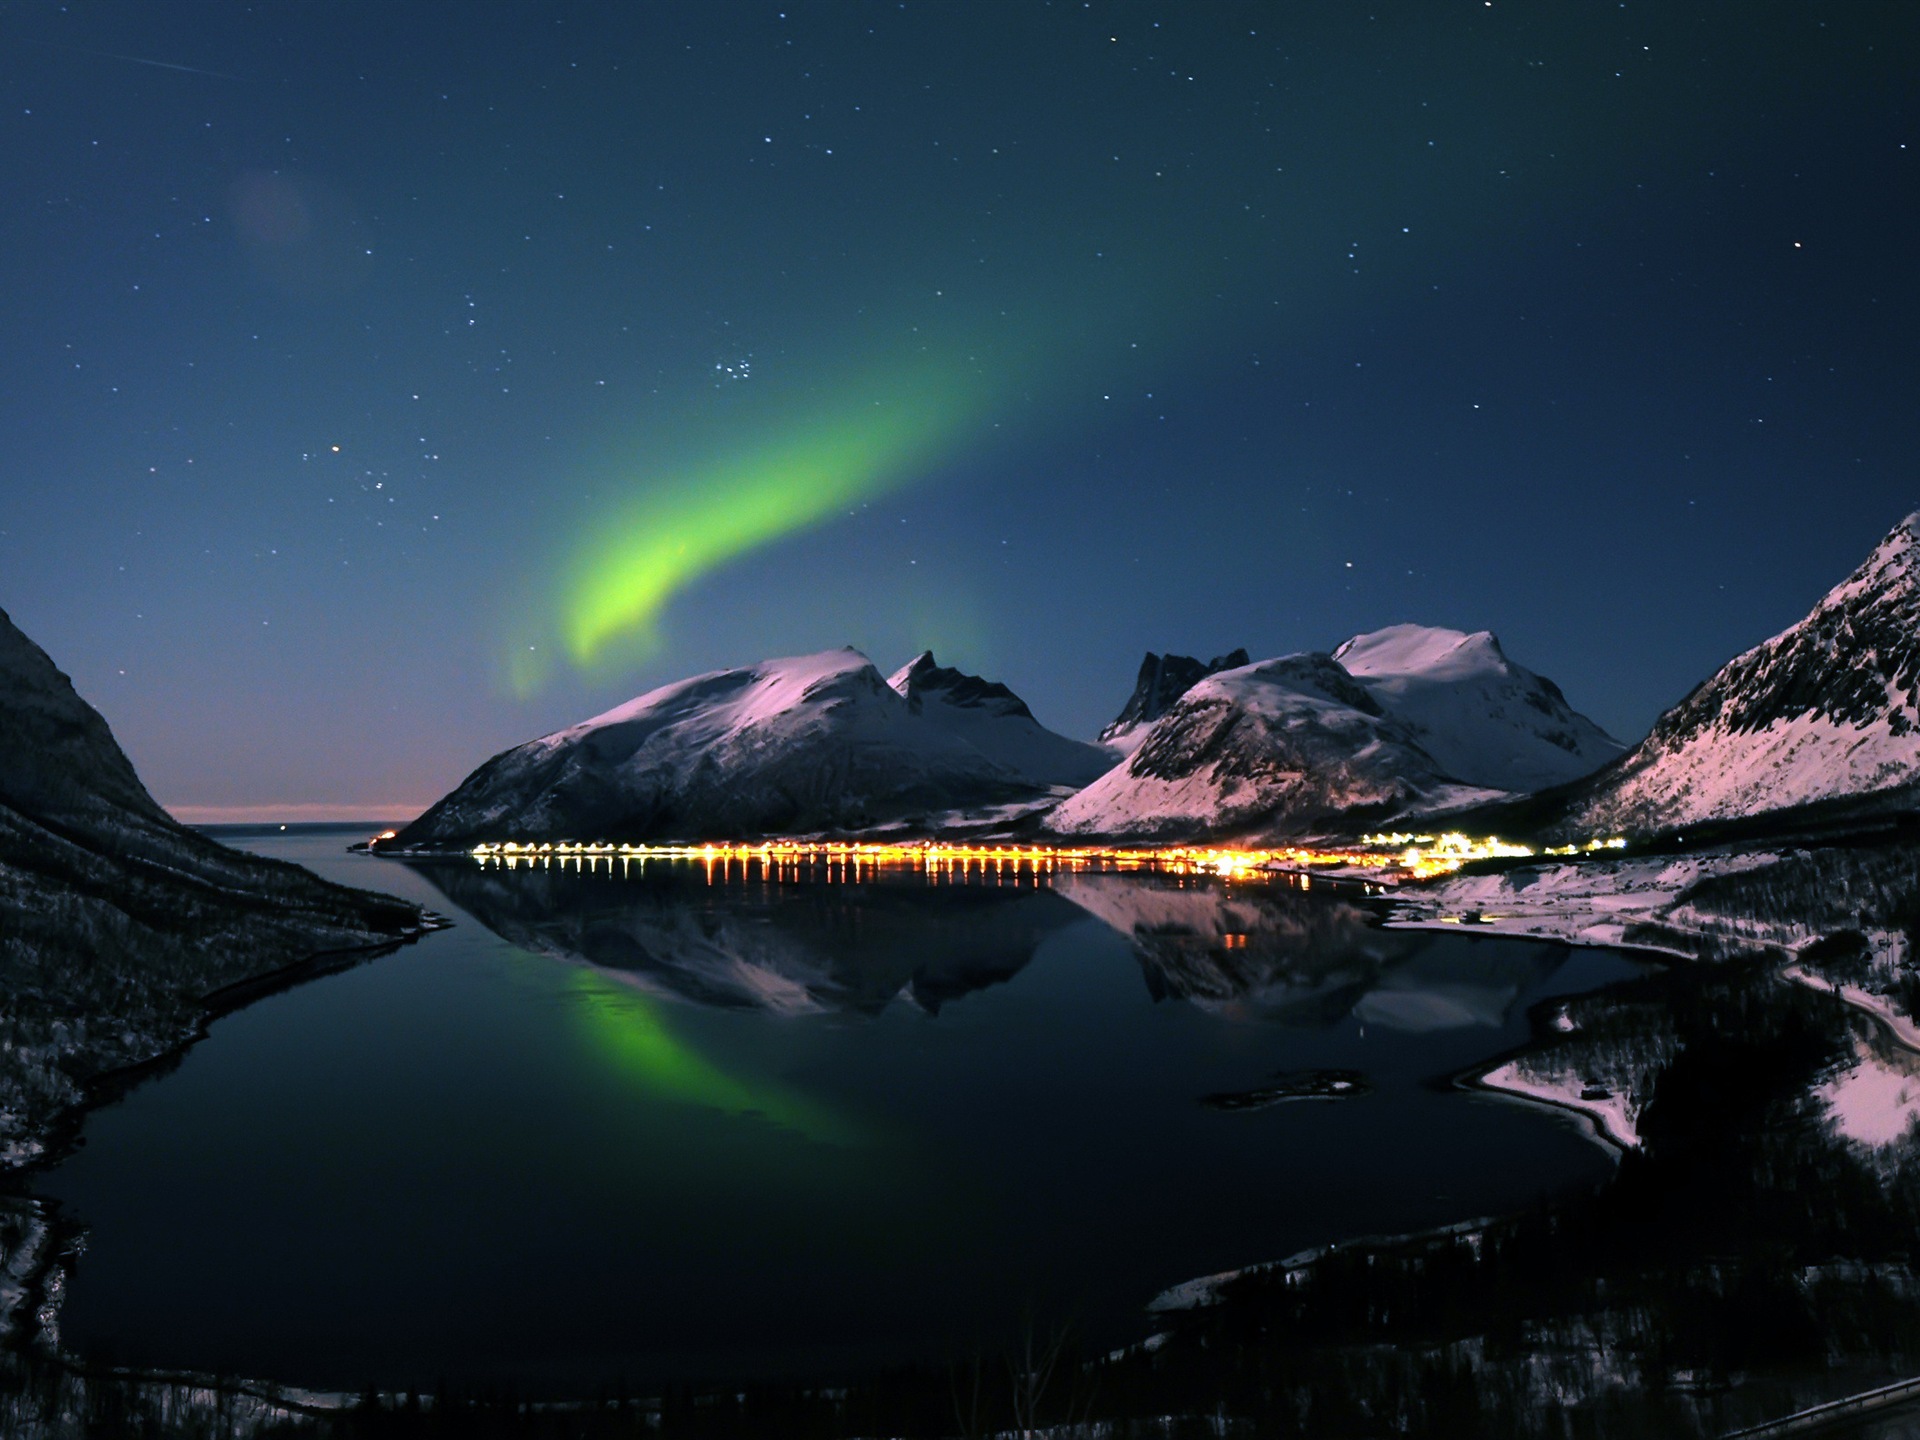 Natural wonders of the Northern Lights HD Wallpaper (2) #2 - 1920x1440